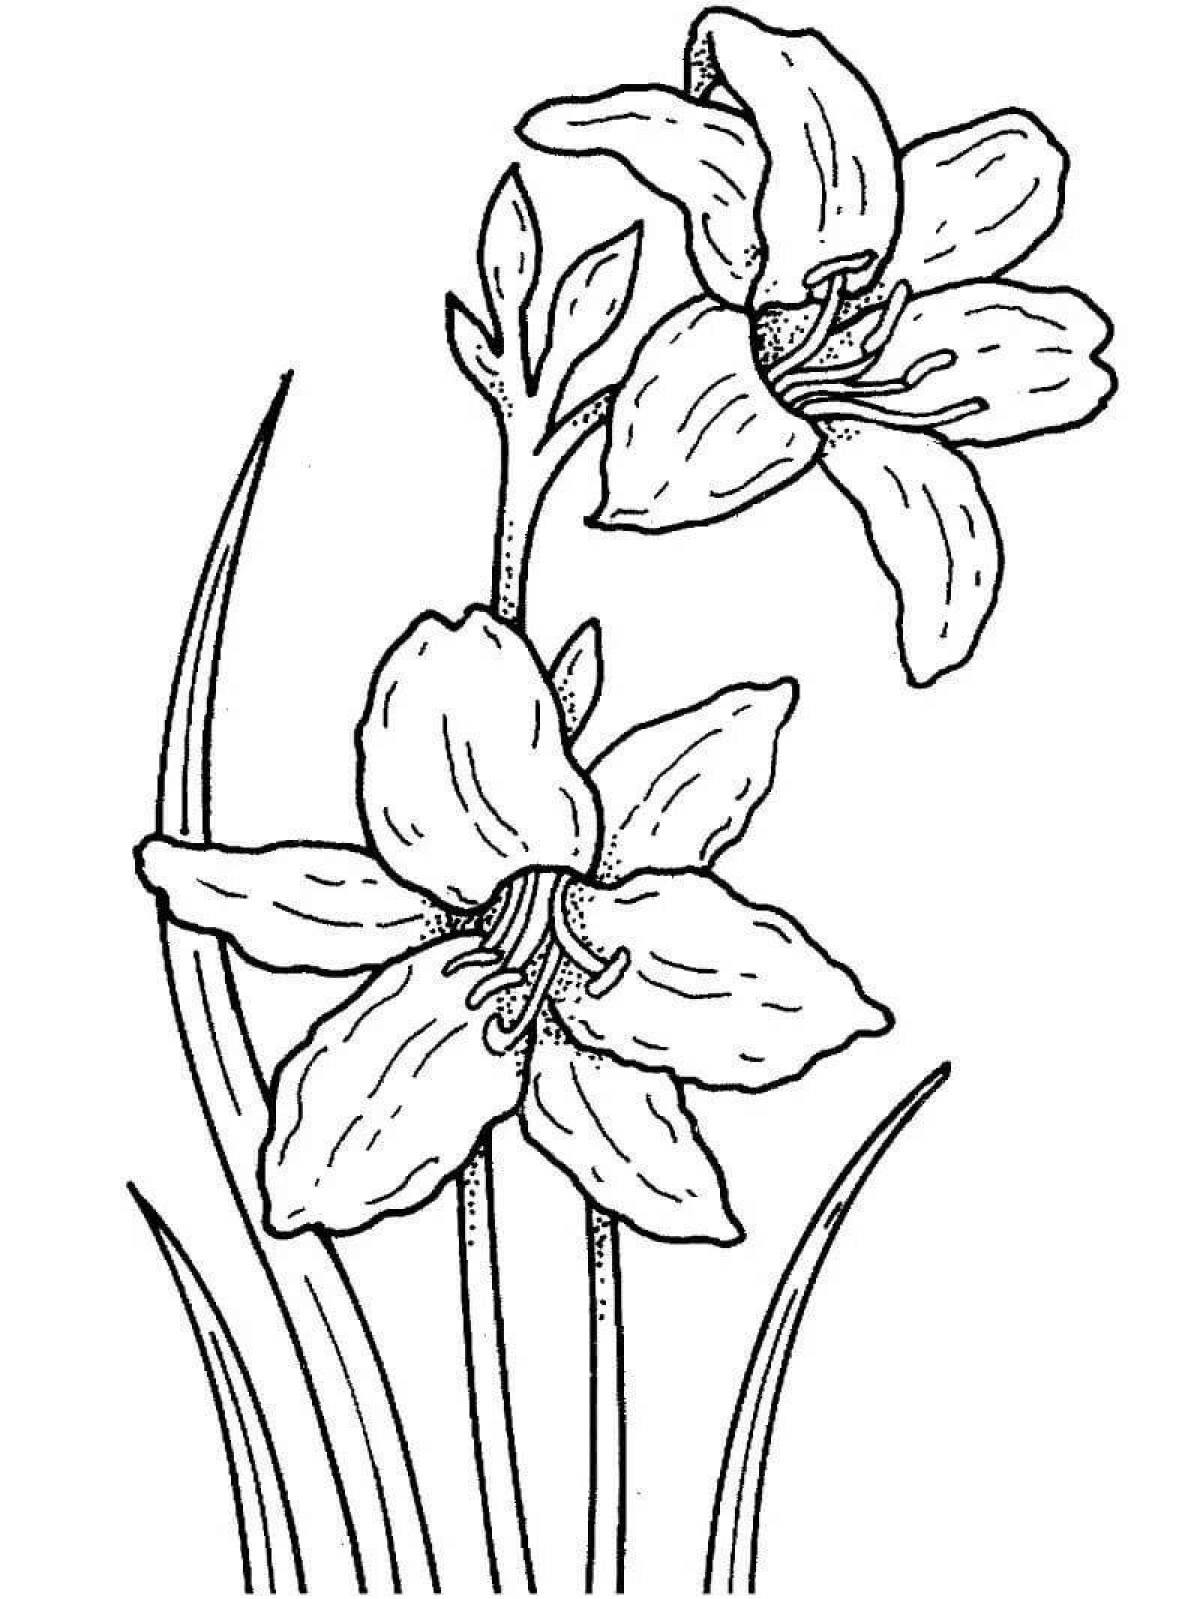 Coloring page delightful narcissus flower